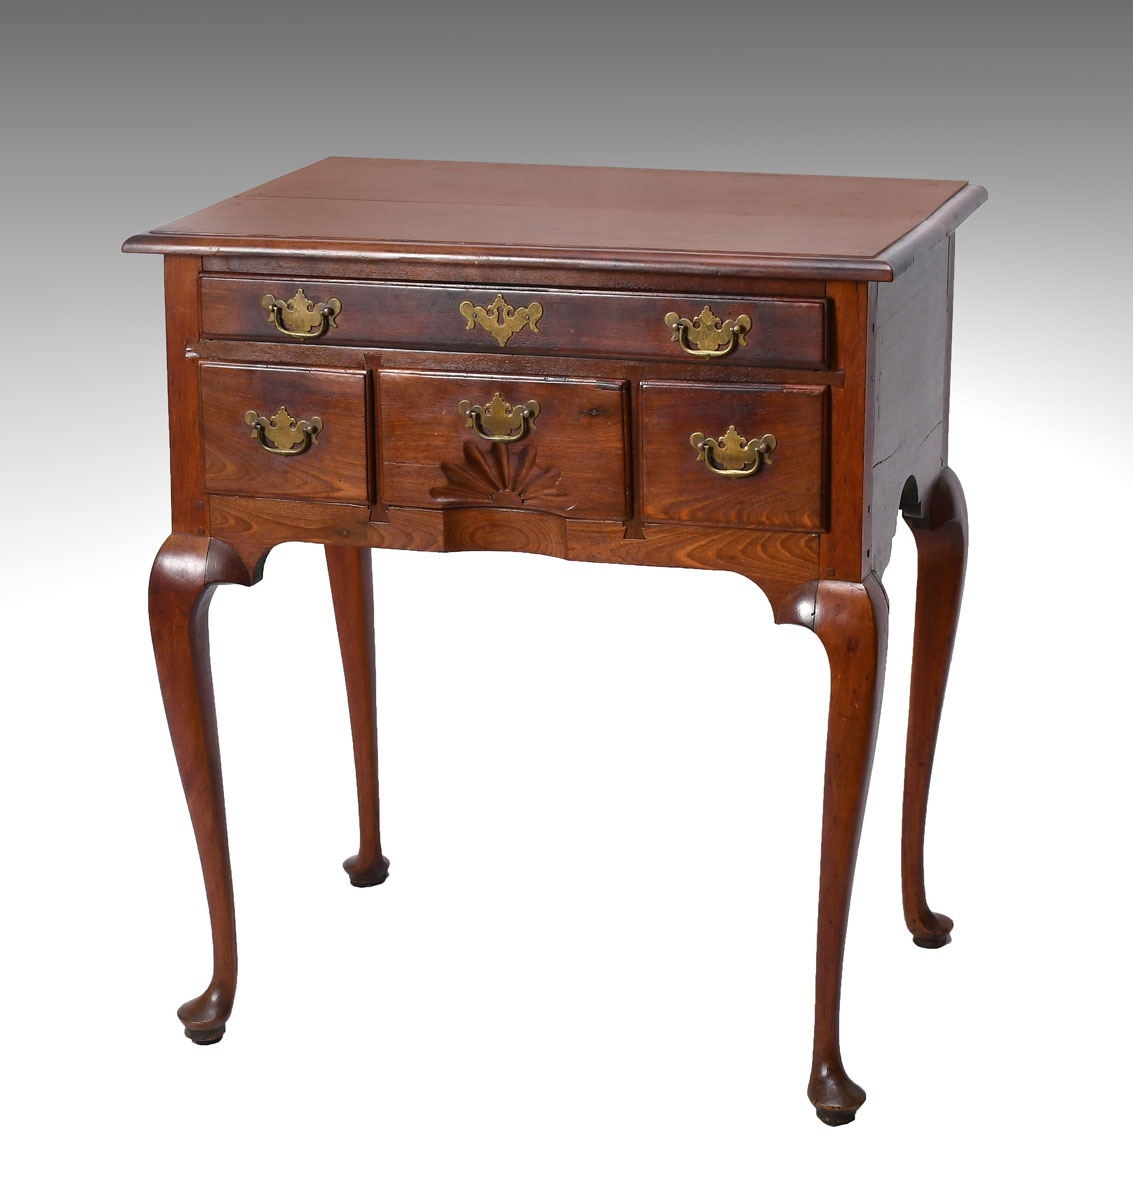 4 DRAWER QUEEN ANNE DRESSING TABLE: